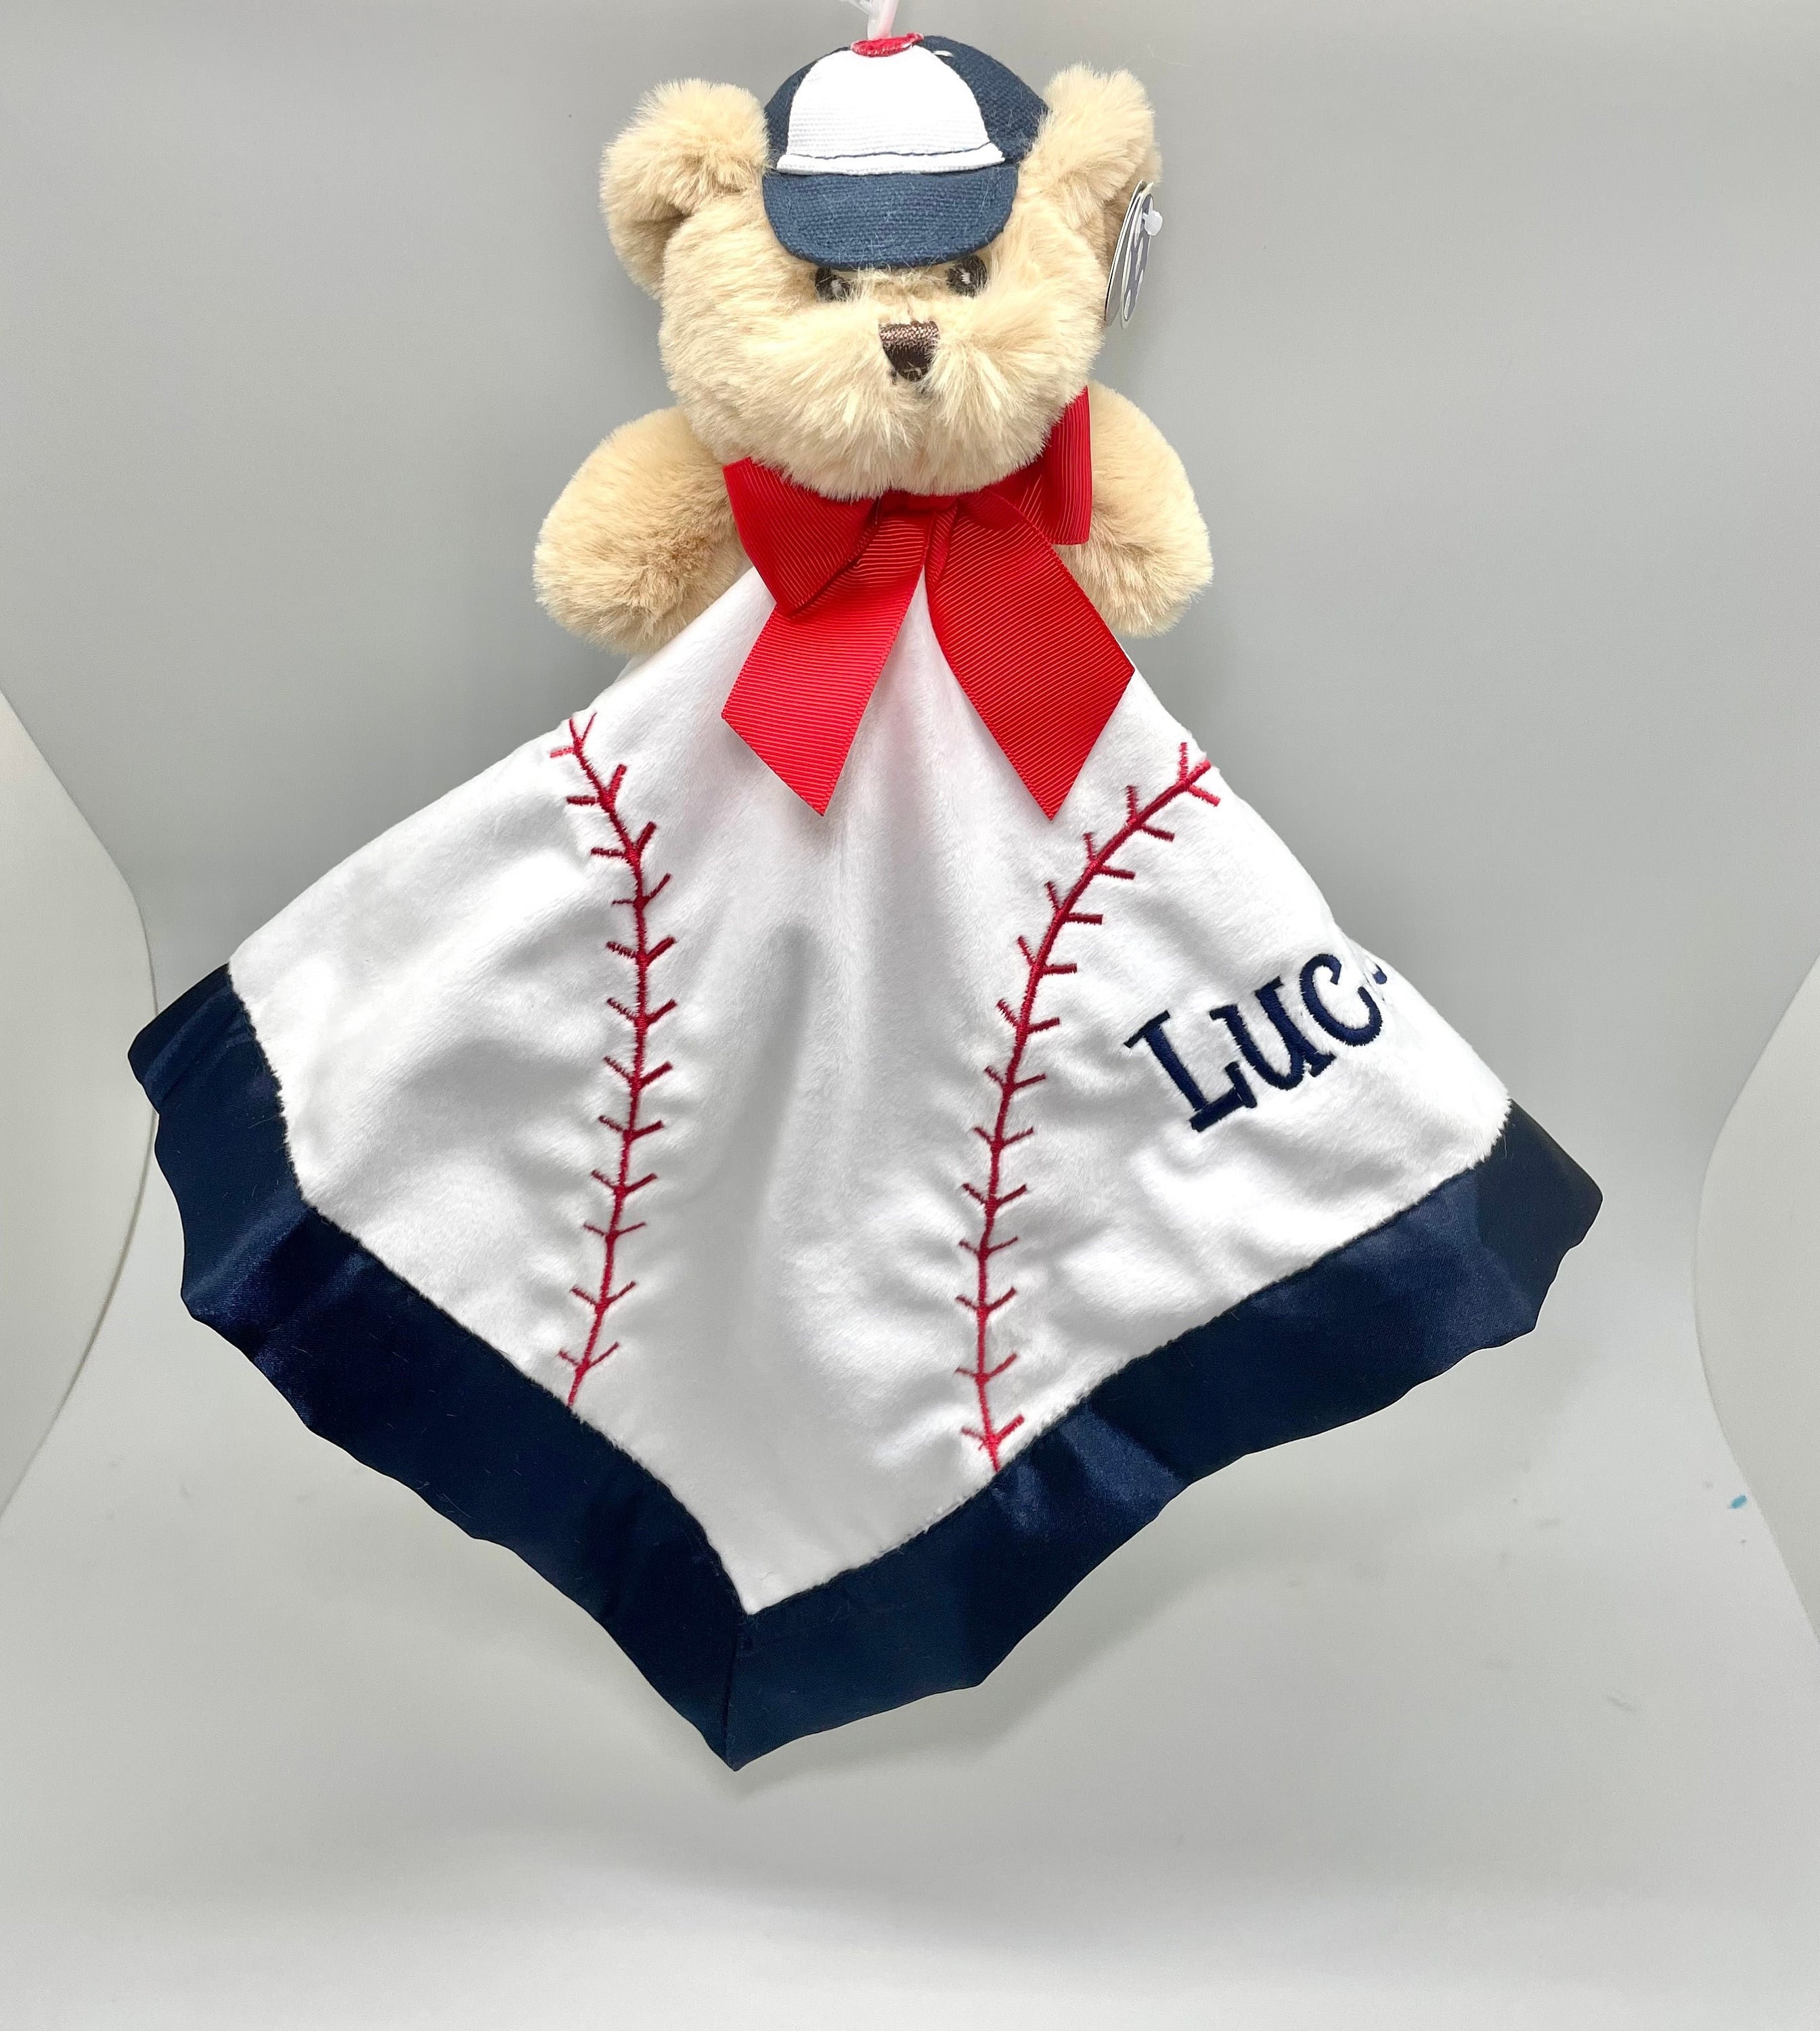 Chicago Cubs Personalized Plush Baby Baseball - White